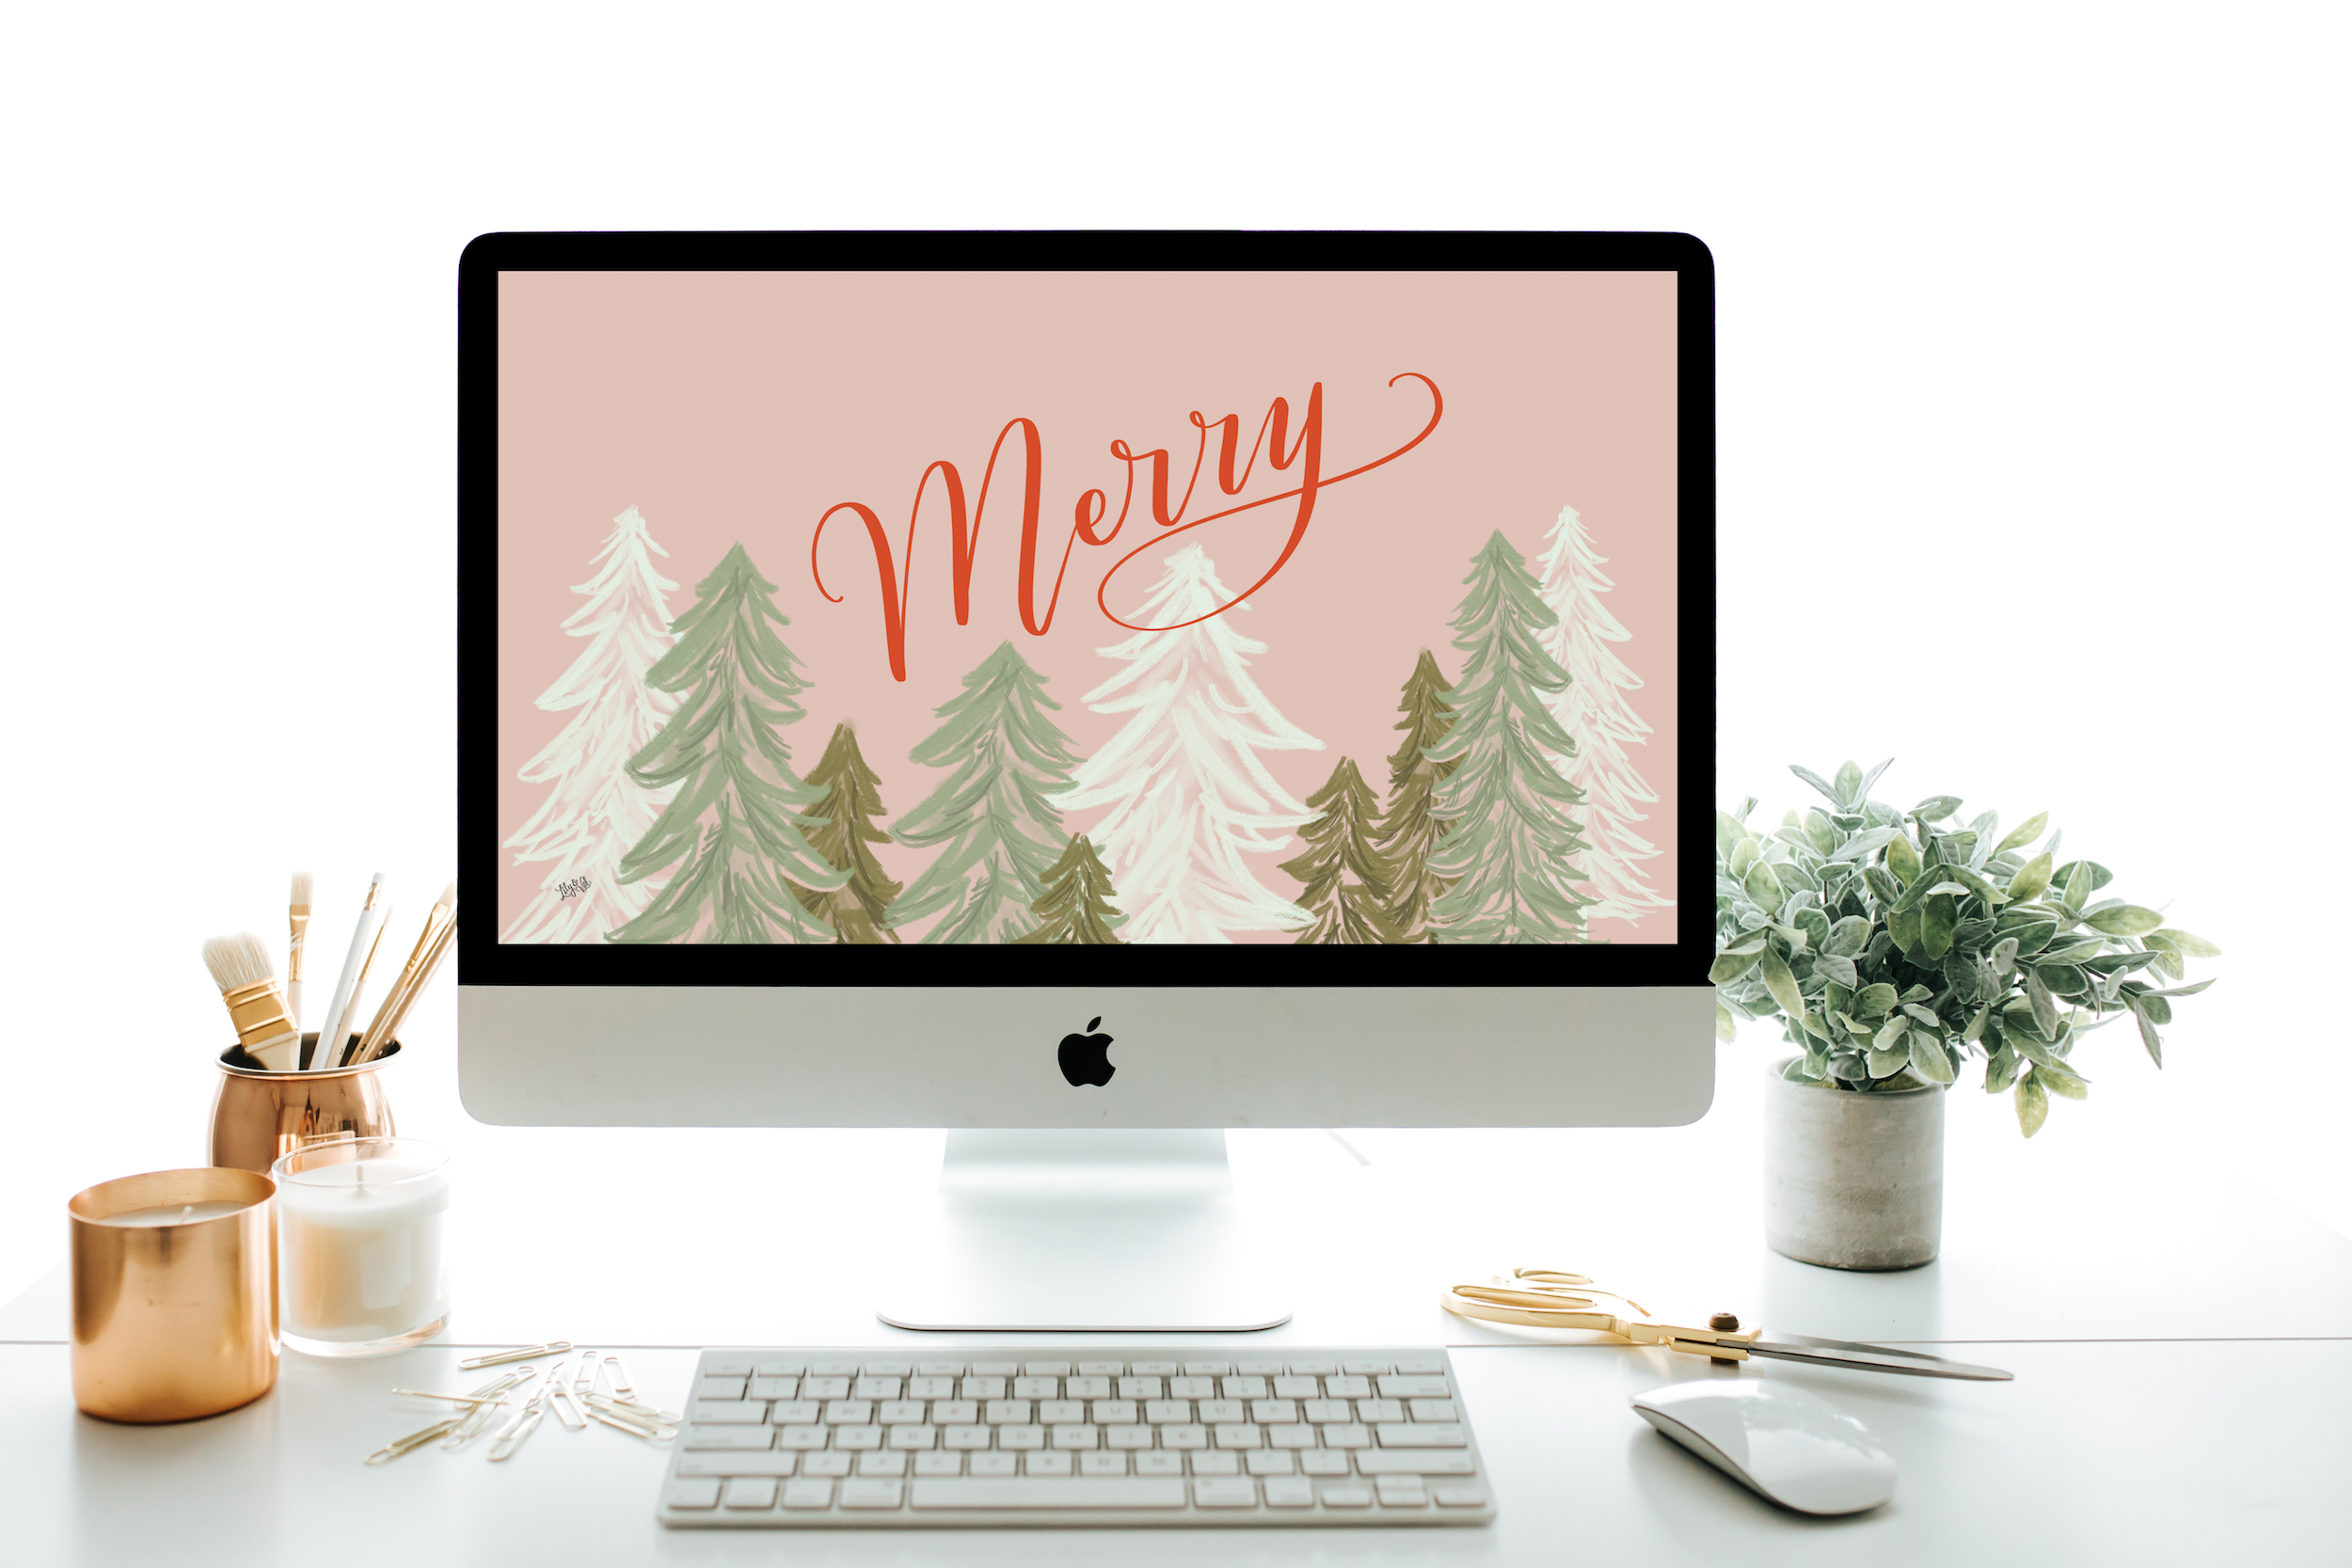 December's "Merry" FREE Desktop Download by Lily & Val